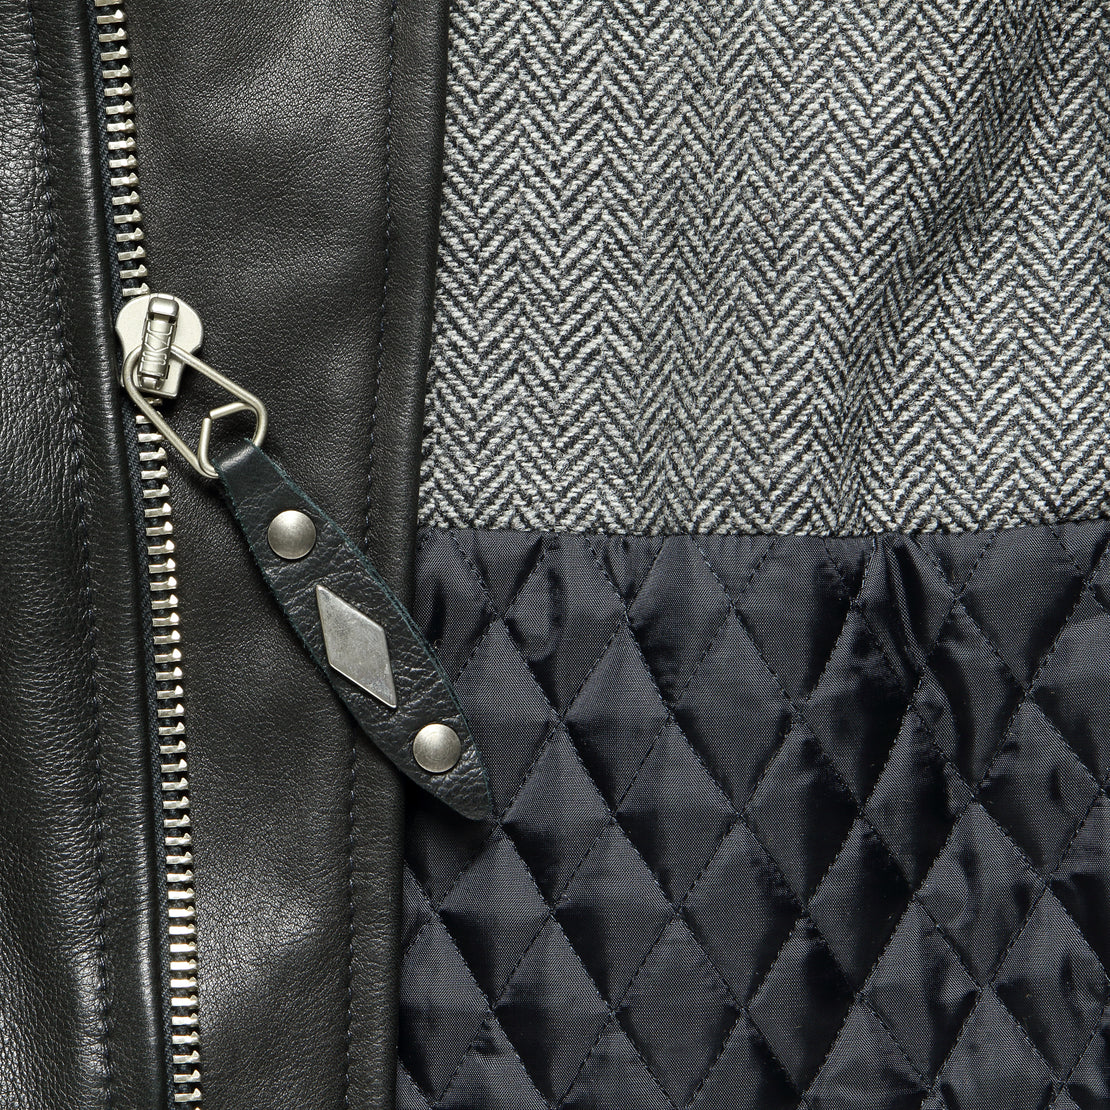 Anniversary Perfecto Jacket - Black - Schott - STAG Provisions - Outerwear - Coat / Jacket